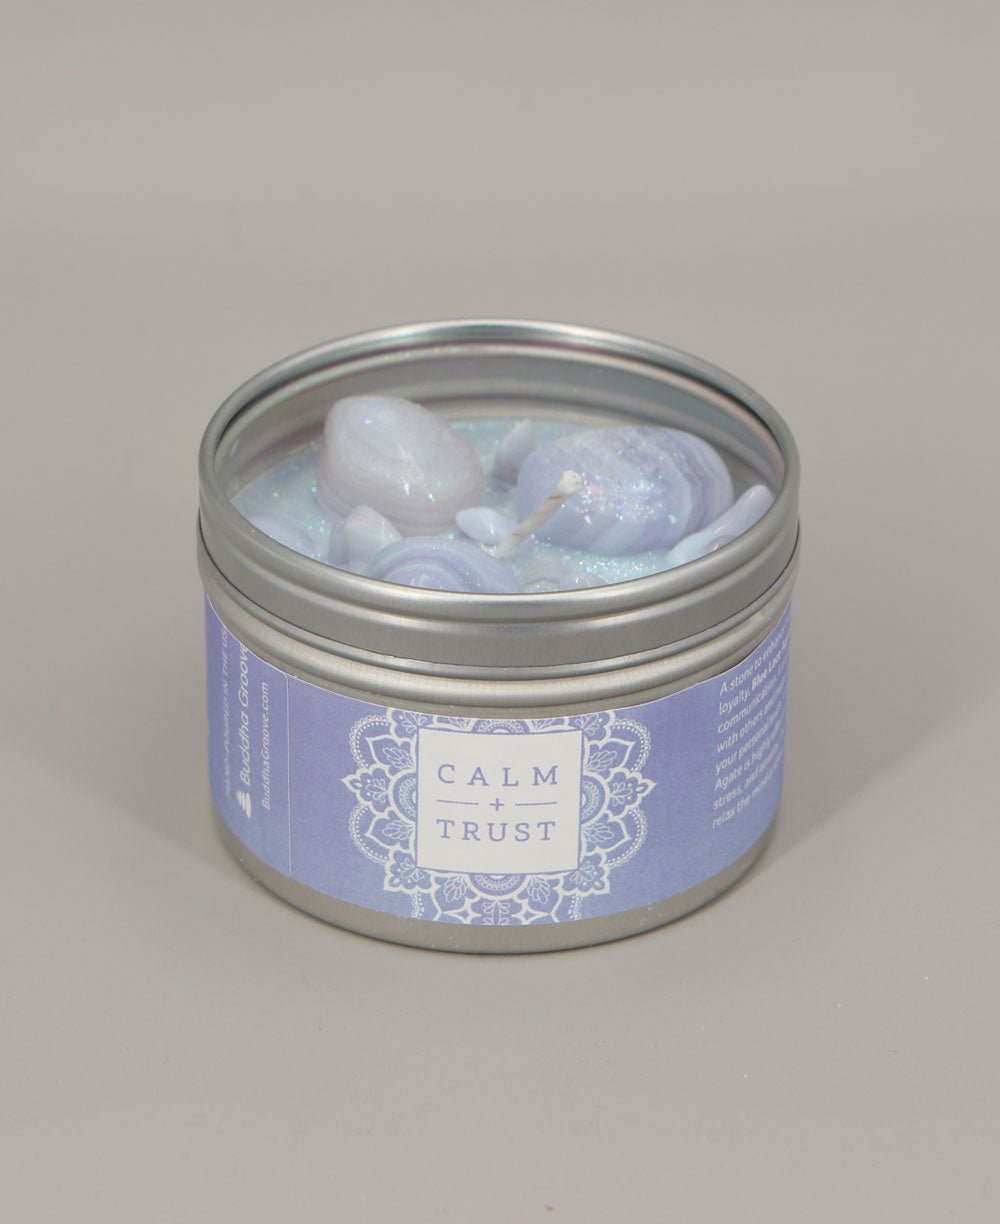 Blue Lace Agate Gemstone Aromatherapy Candle for Calm - Candles